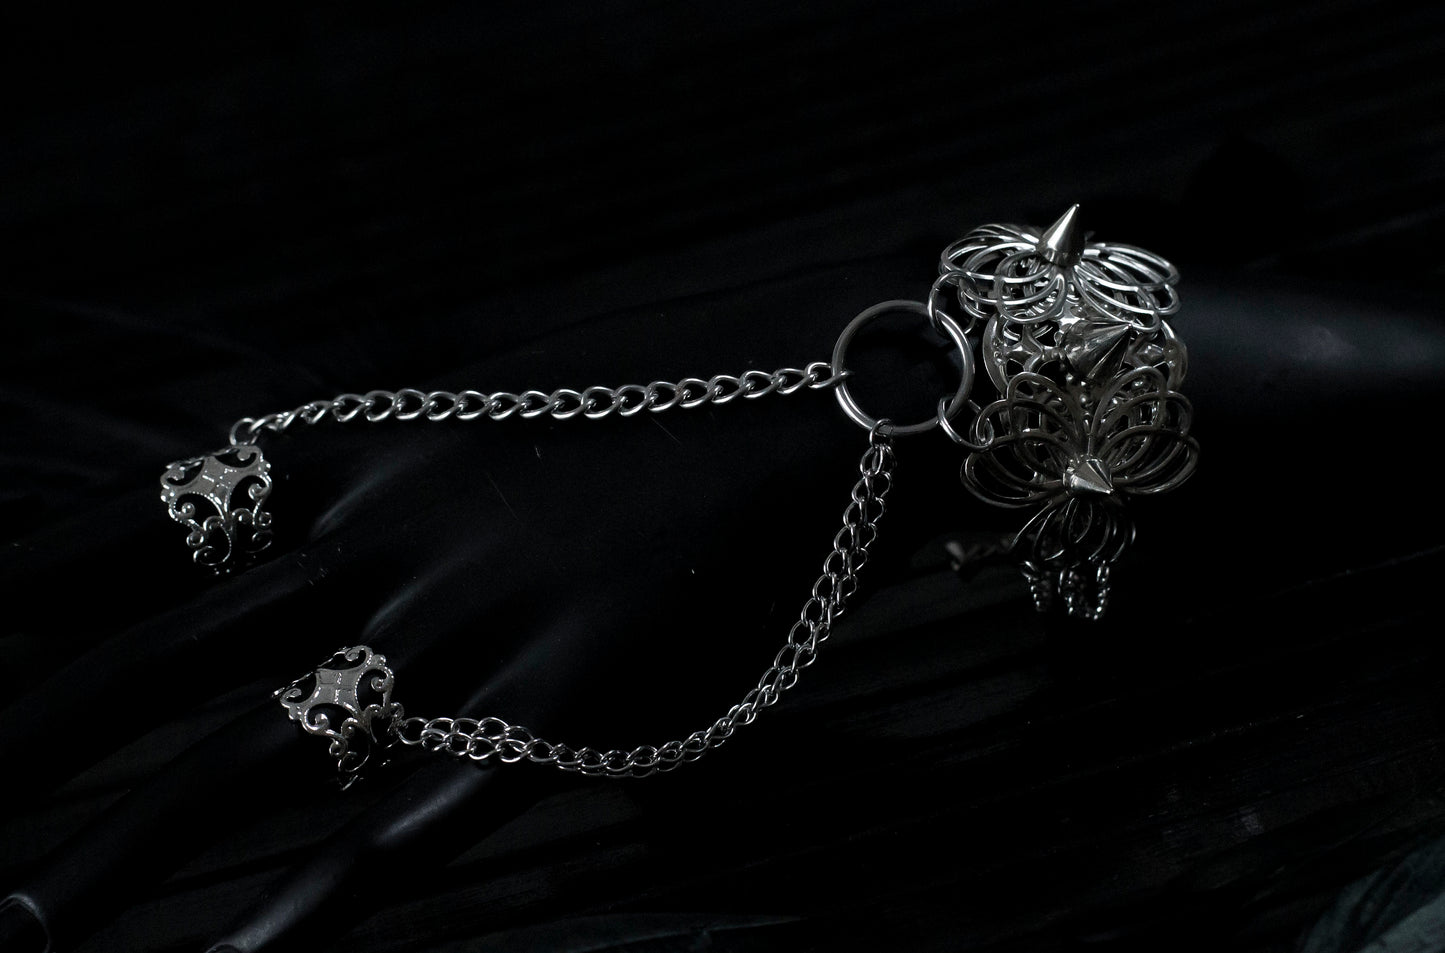 A Myril Jewels punk hand chain bracelet ring with ornate filigree detailing cascades over a black-clad hand, reflecting the brand's mastery in crafting dark avant-garde accessories. Ideal for gothic, Neo Gothic, and alternative styles, this piece is perfect for enhancing Halloween outfits, gothic-chic looks, and Witchcore ensembles. It's also an eye-catching choice for those seeking statement rave party jewelry or festival jewels, offering daily wear versatility for the minimal goth aesthetic